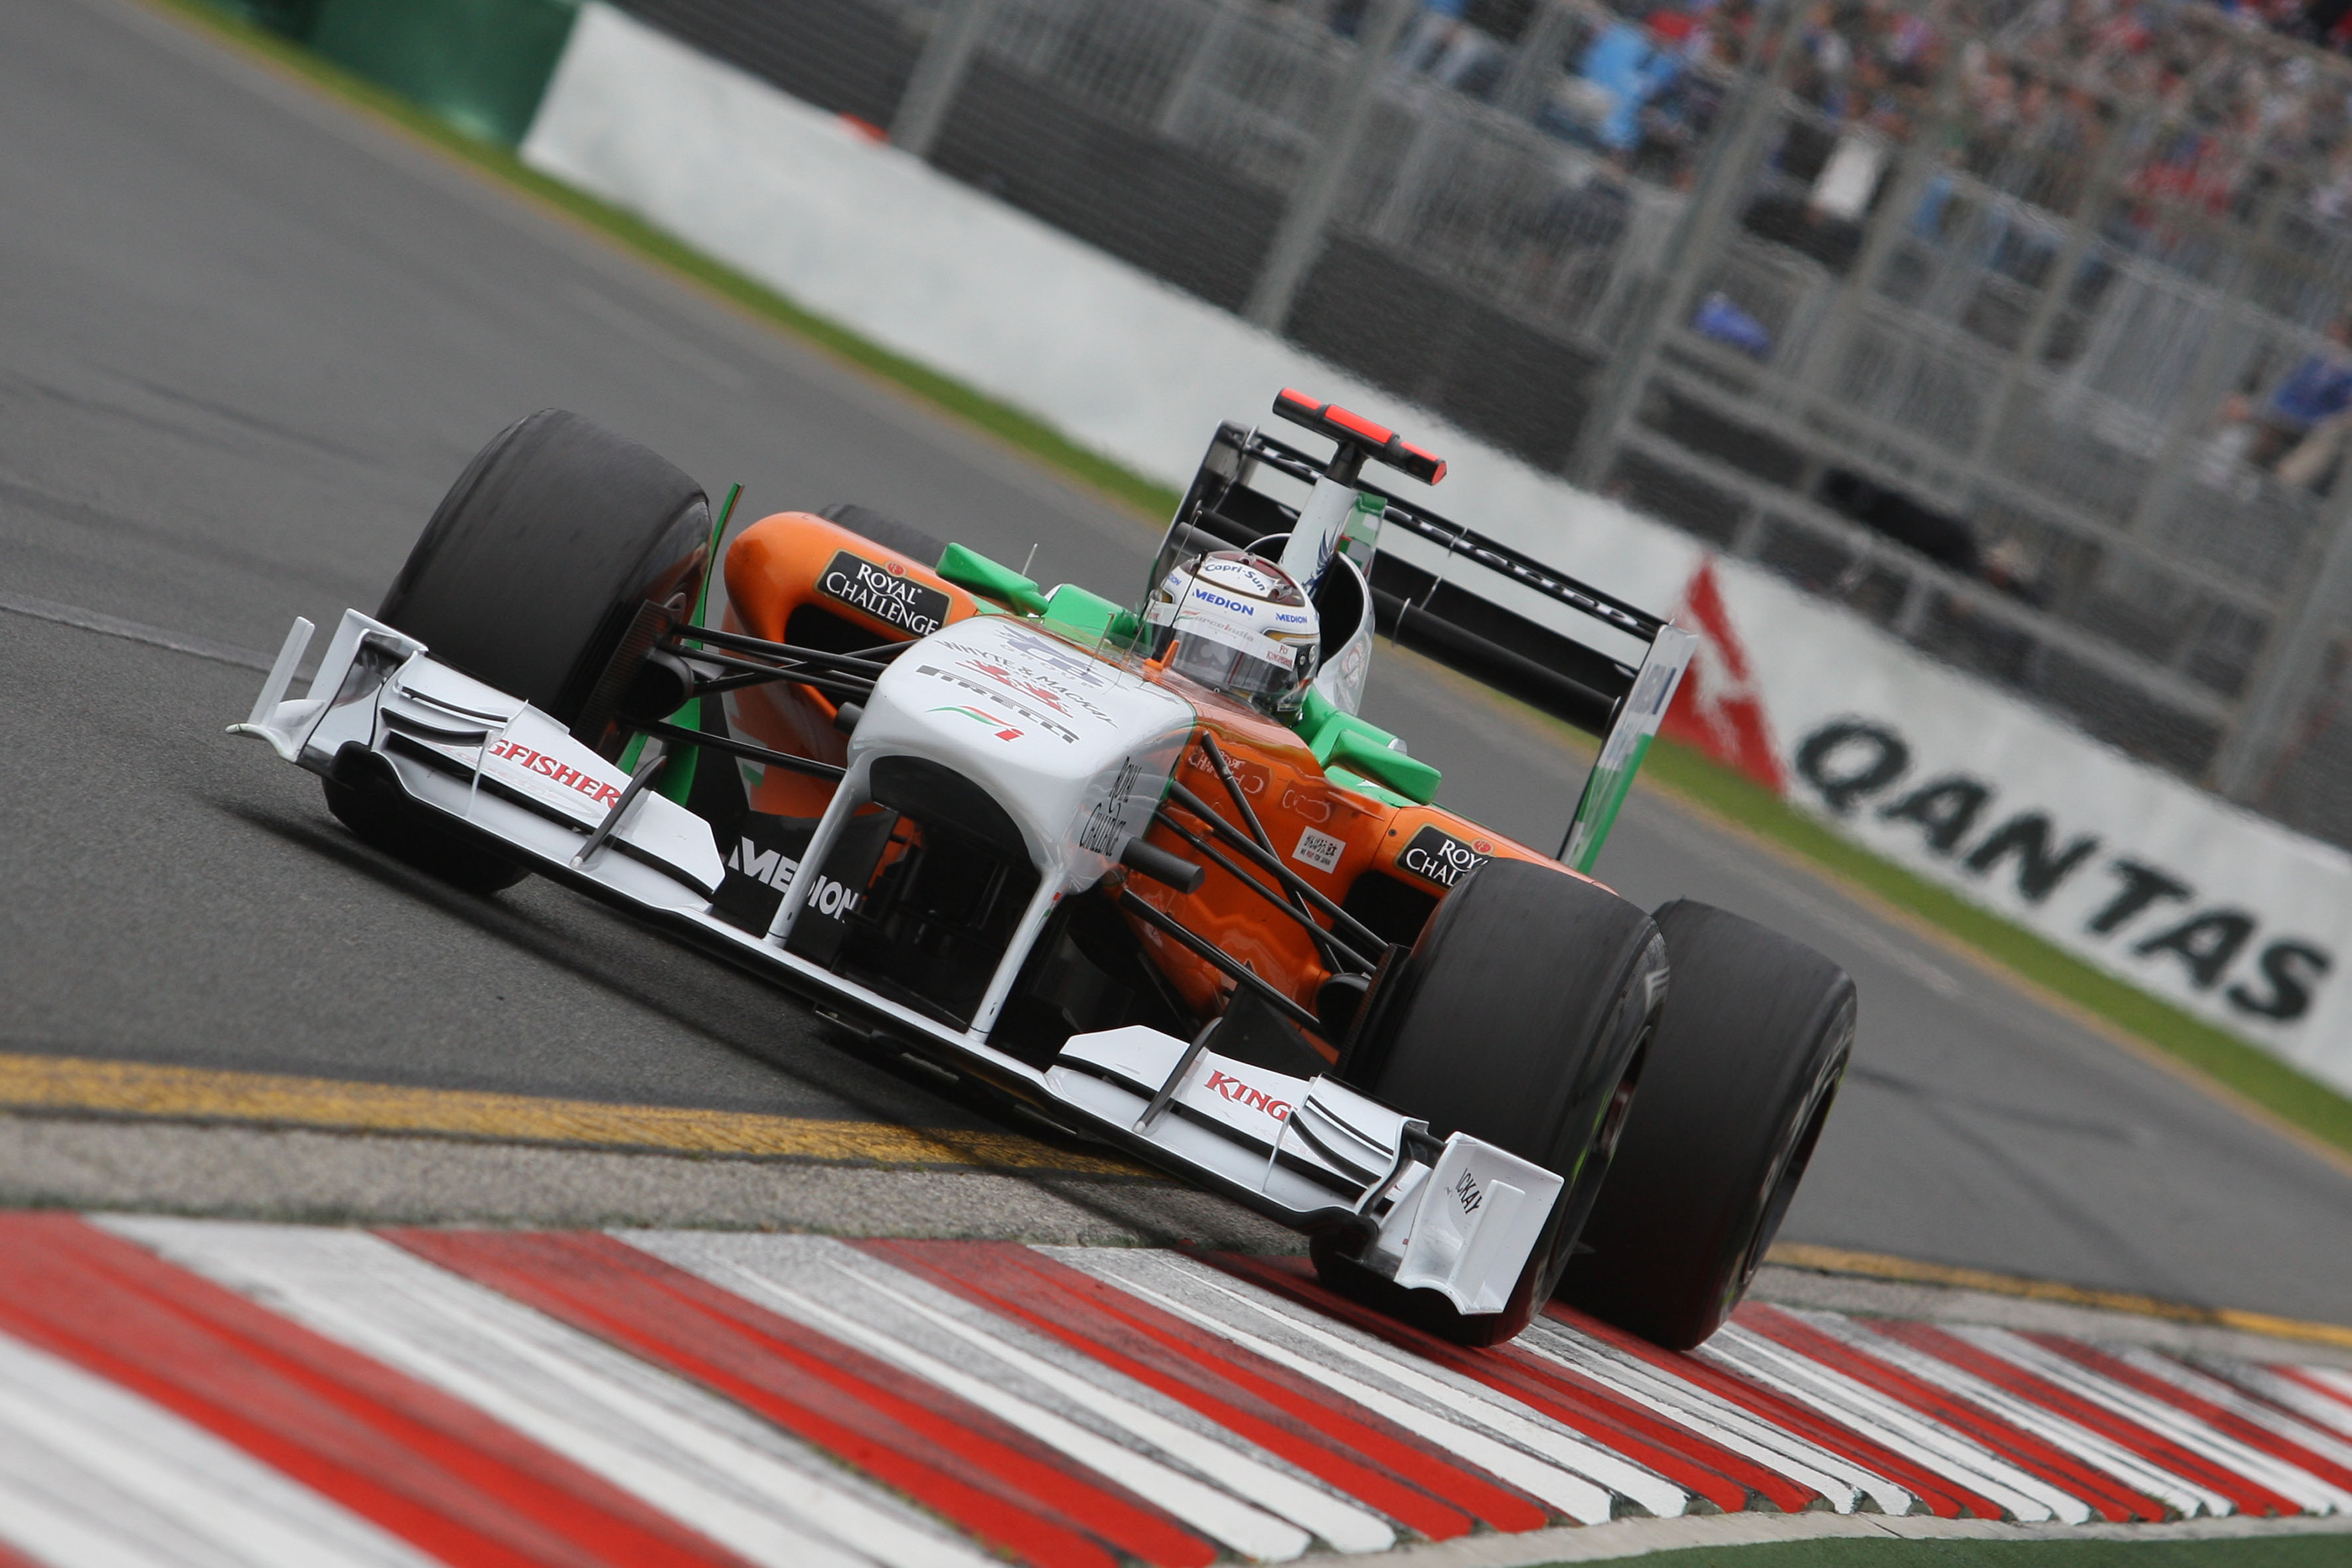 Force India zet in op dubbele puntenfinish